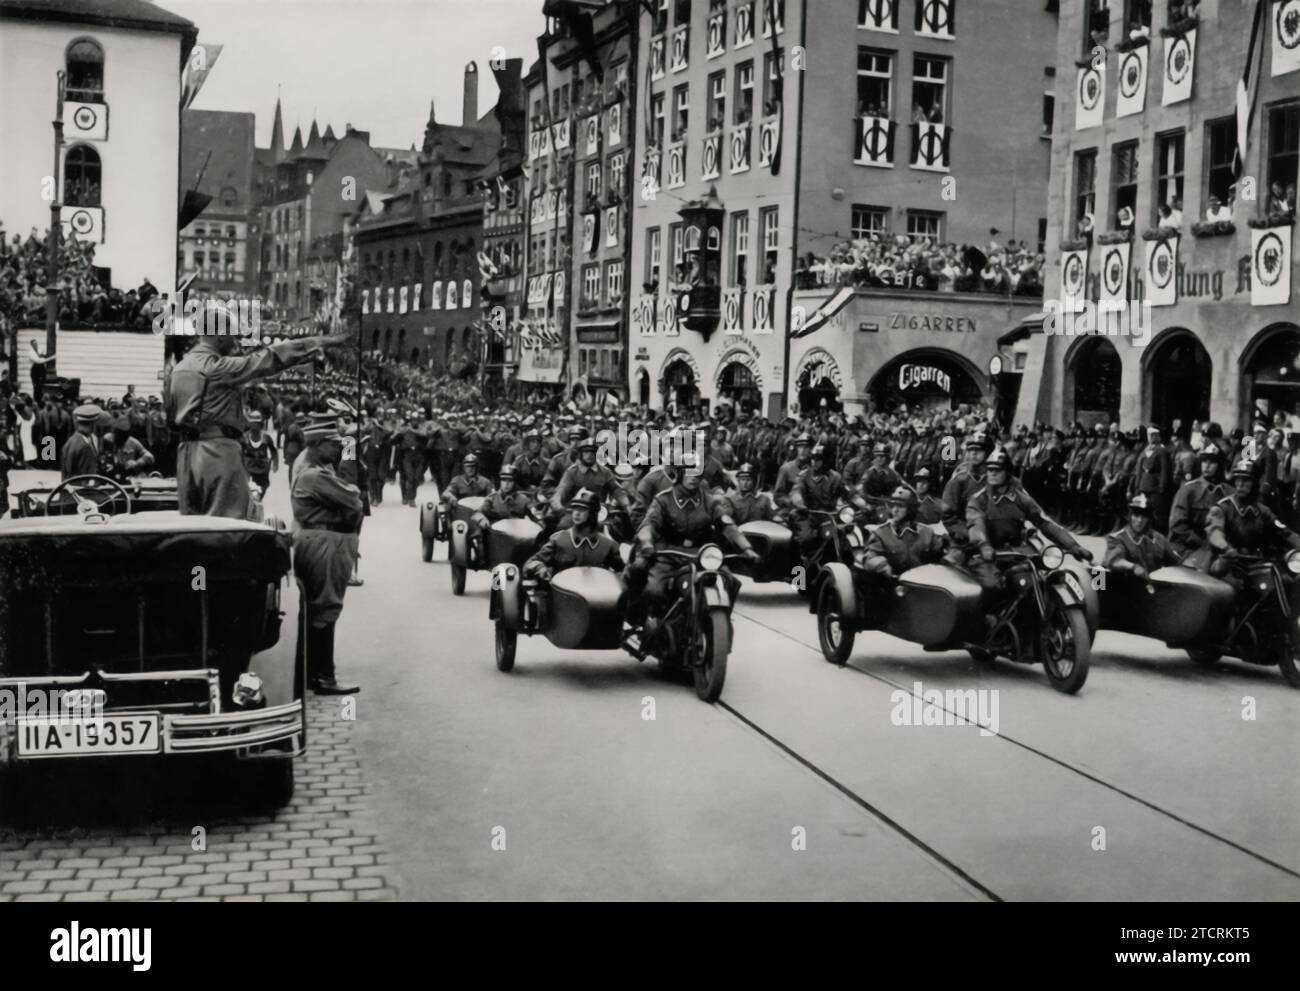 At the 1935 Reichsparteitag (Nazi Party Rally), Adolf Hitler is seen standing in his open-top car, saluting the motorized SA (Sturmabteilung) units. This image captures a moment of interaction between Hitler and the SA, emphasizing the role of motorization in the Nazi military apparatus. Hitler's salute from the car, a symbol of his leadership and the regime's modernization efforts, highlights the importance of the SA in the party's show of strength and unity during these large-scale, highly choreographed events. Stock Photo